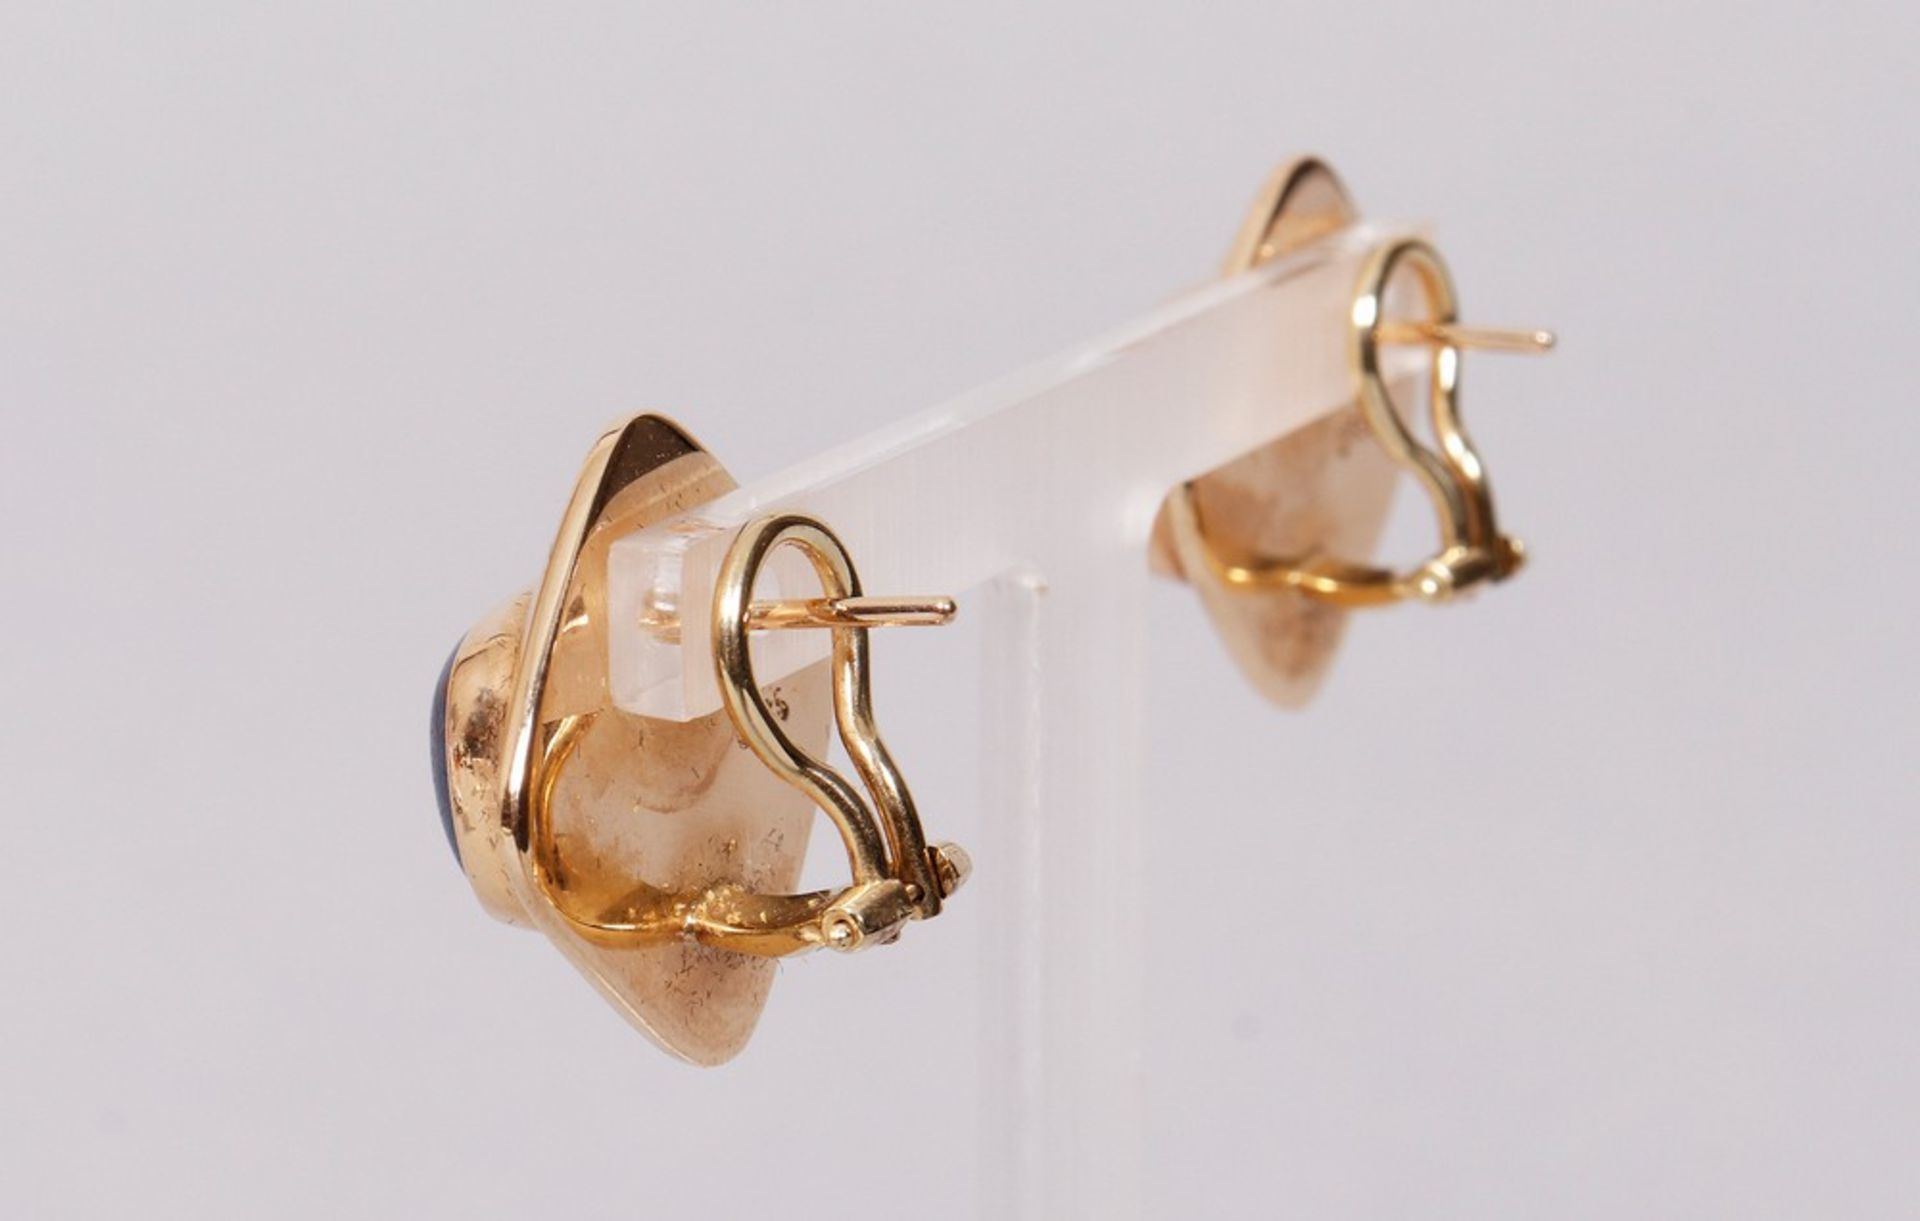 Pair of clip-on earrings, 585 gold - Image 4 of 4